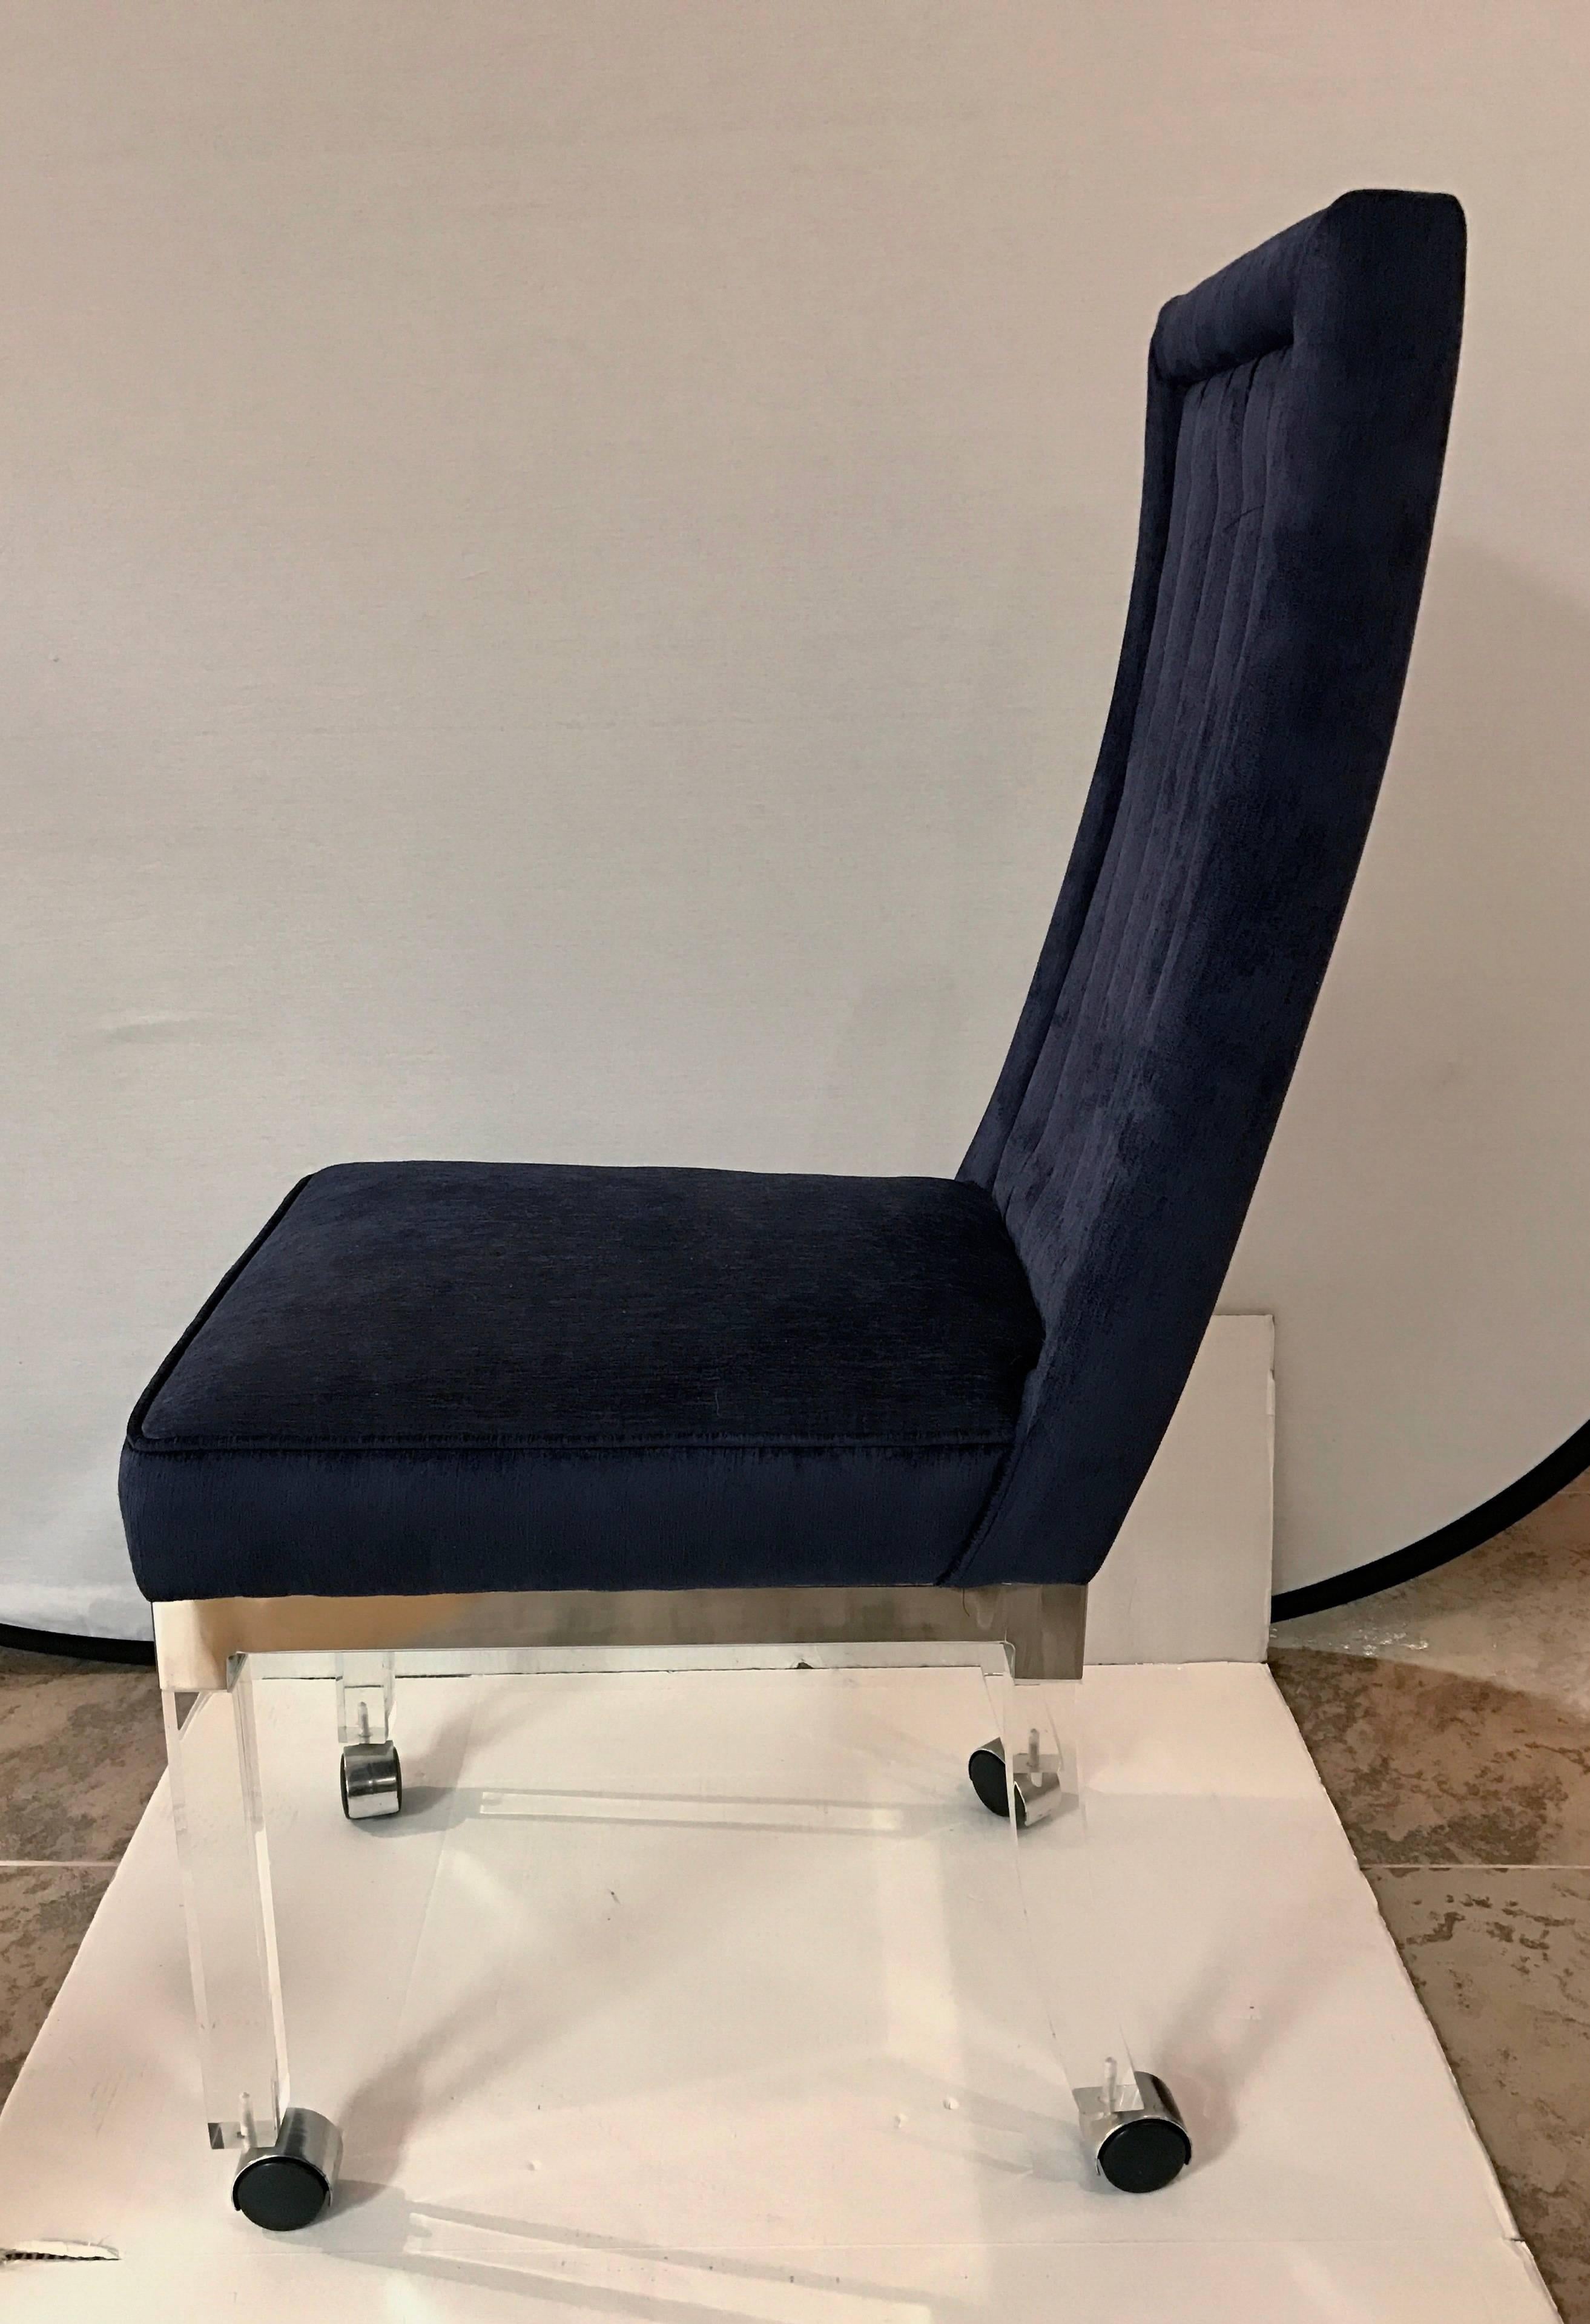 Stunning Charles Hollis Jones Mid-Century Modern Lucite dining chair on removable castors. Features four Lucite legs trimmed with chrome, and channel back tufting in a deep royal blue velvet-like fabric.
  